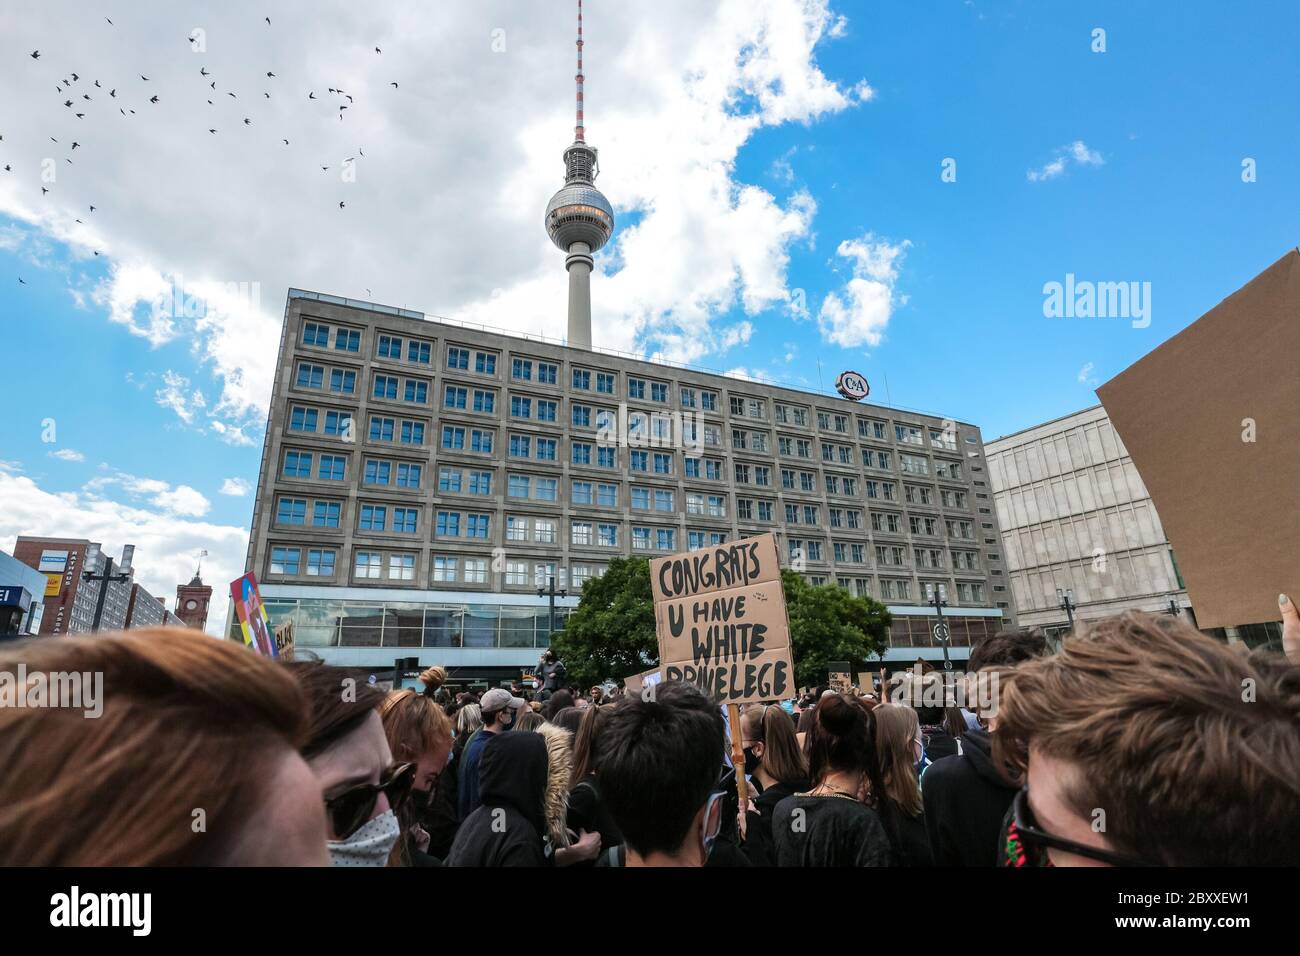 'Congrats u have white privilege' sign at a Black Lives Matter protest on Alexanderplatz Berlin, Germany, following the death of George Floyd. Stock Photo